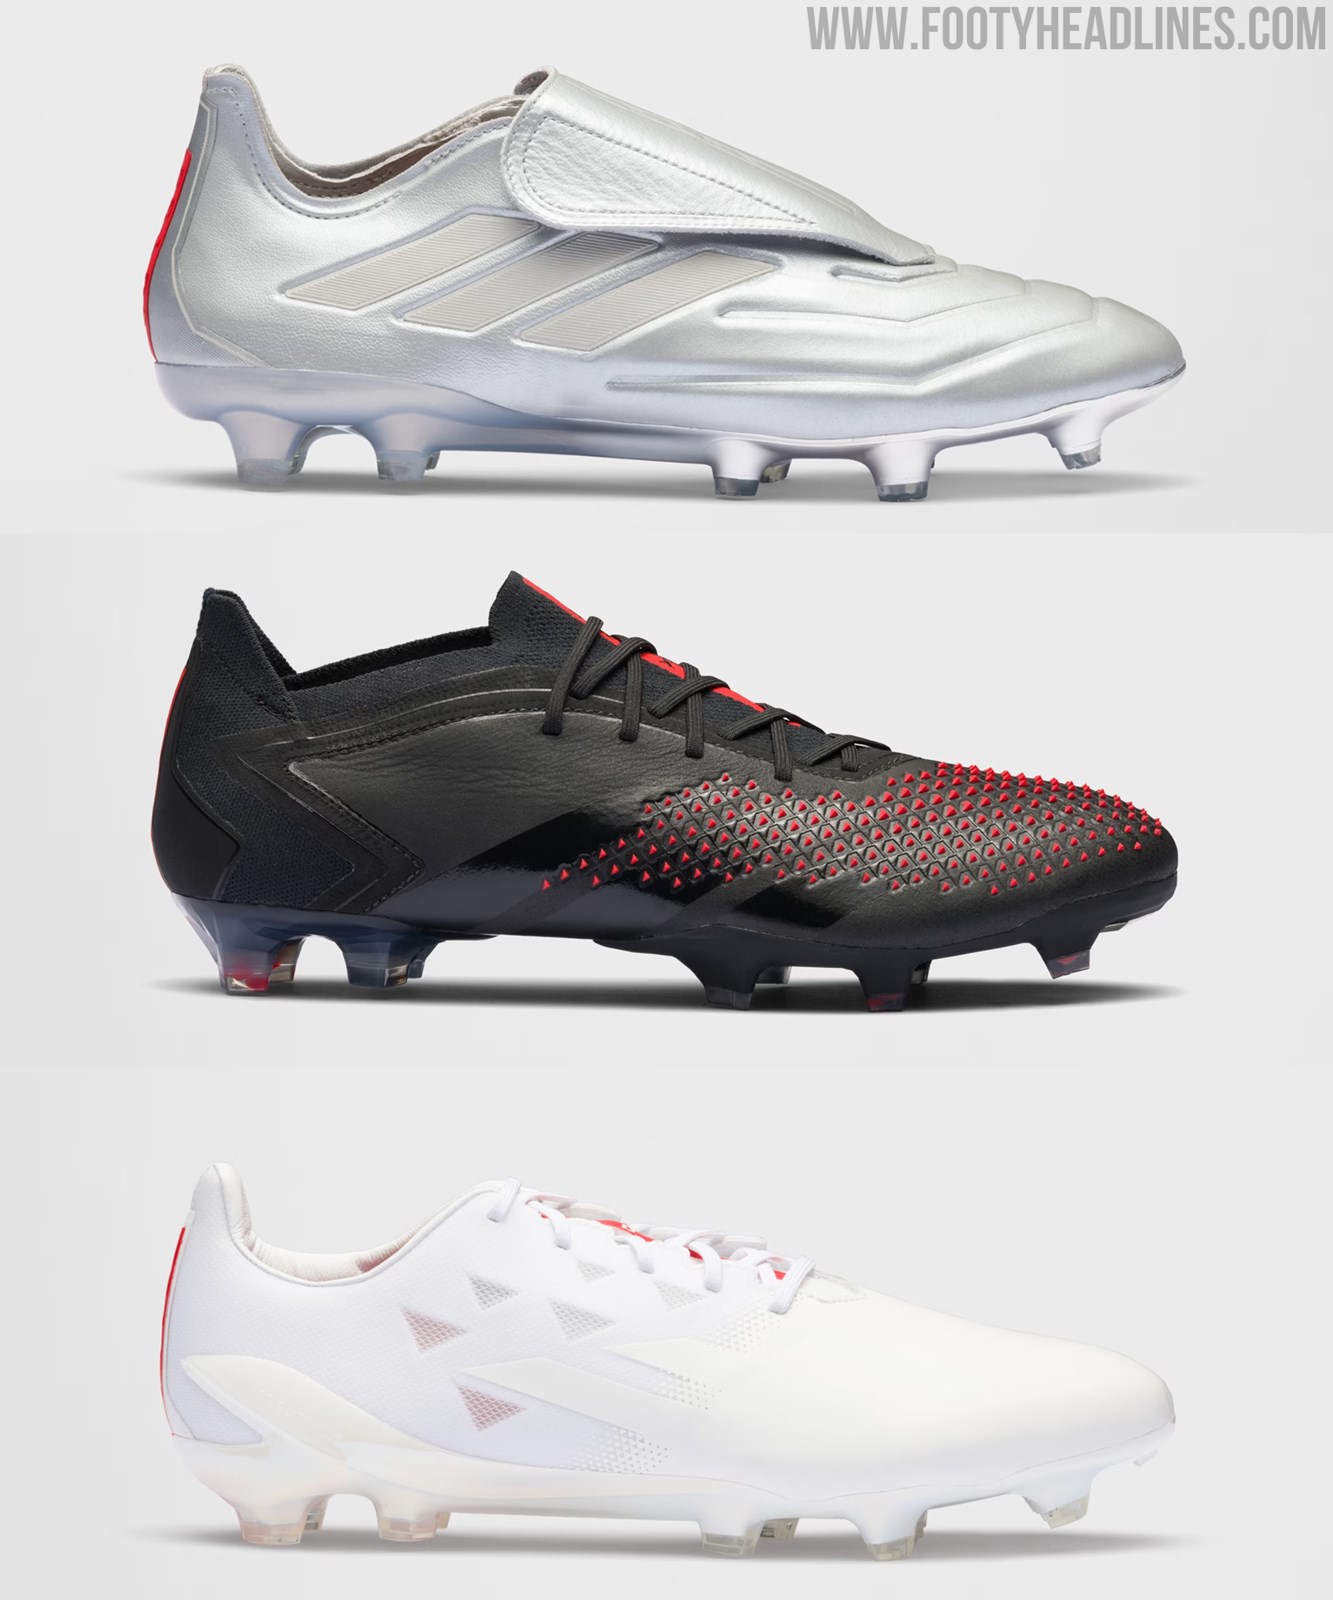 First-Ever Adidas x Prada Football Boots Collection - To Be by Pedri, and Rafael Leão Footy Headlines